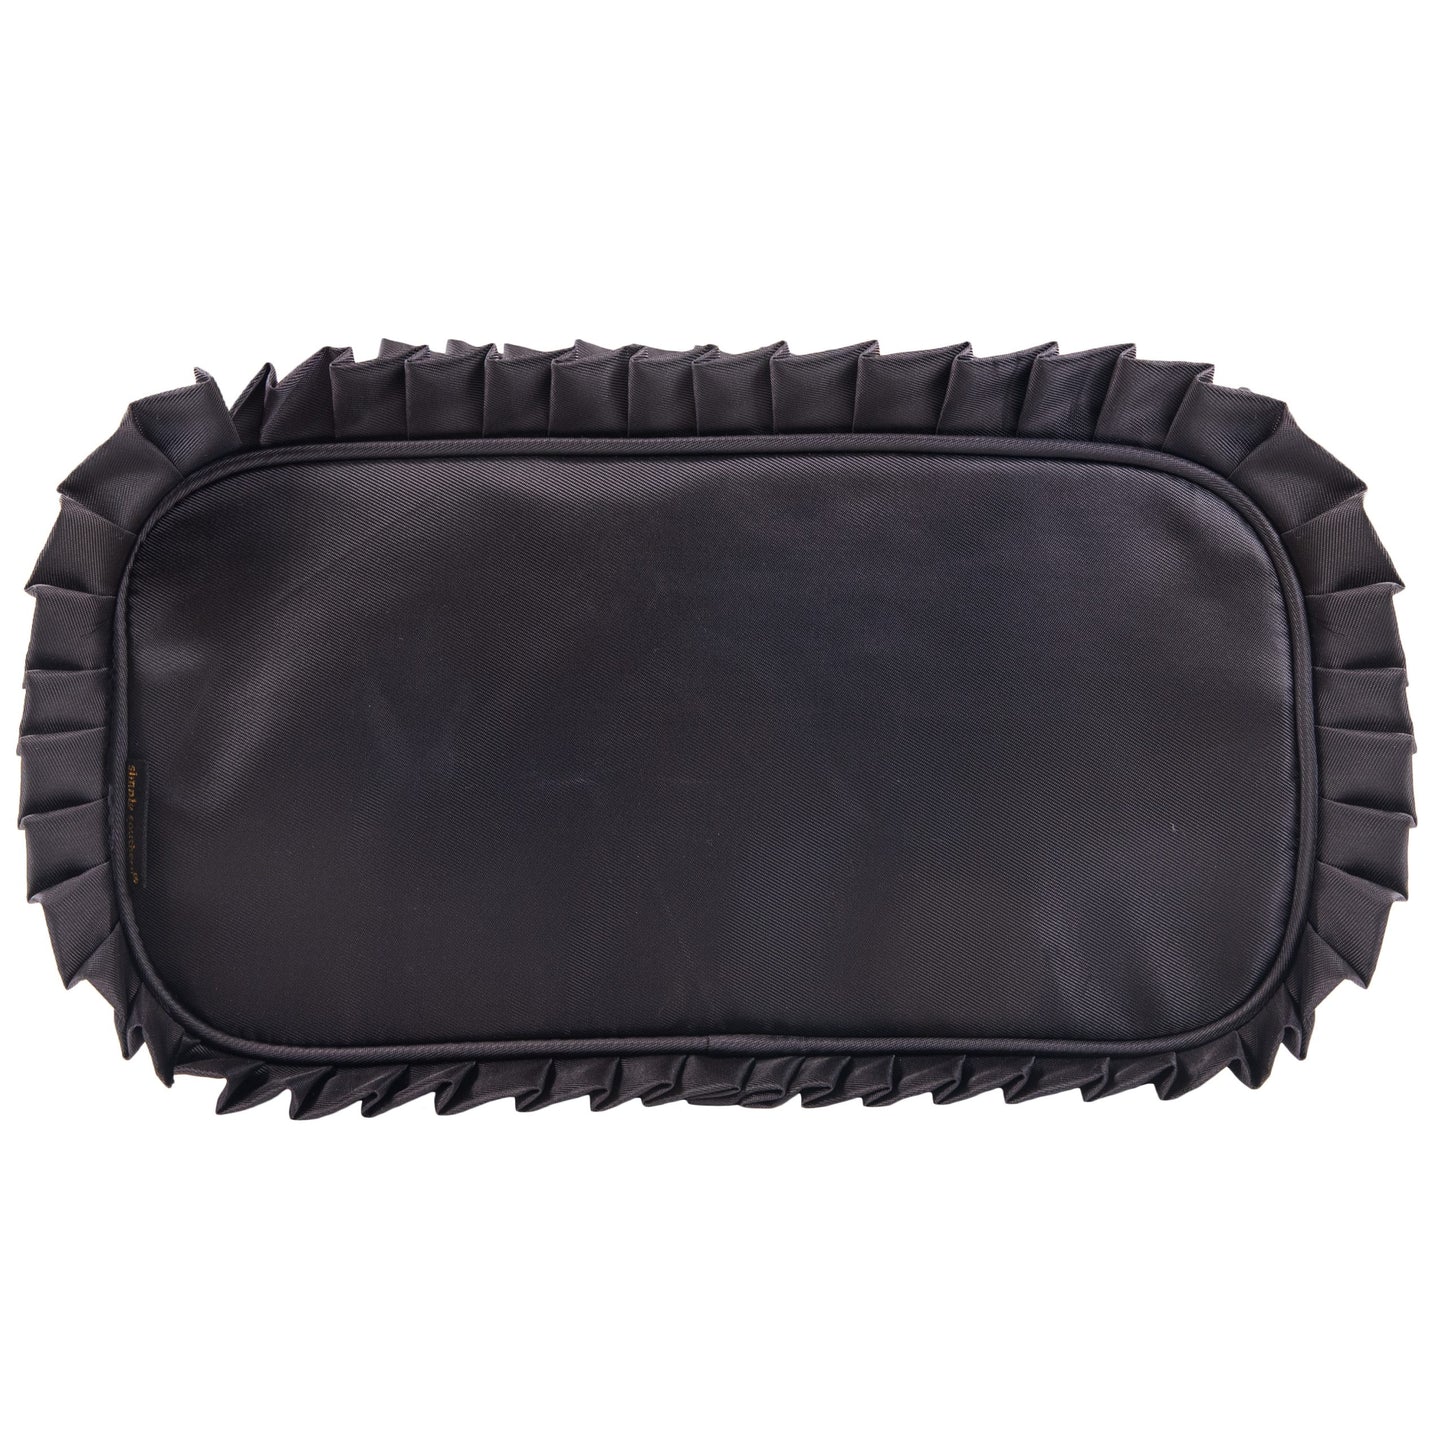 Ruffle Case/Bag for Makeup or Personal Items